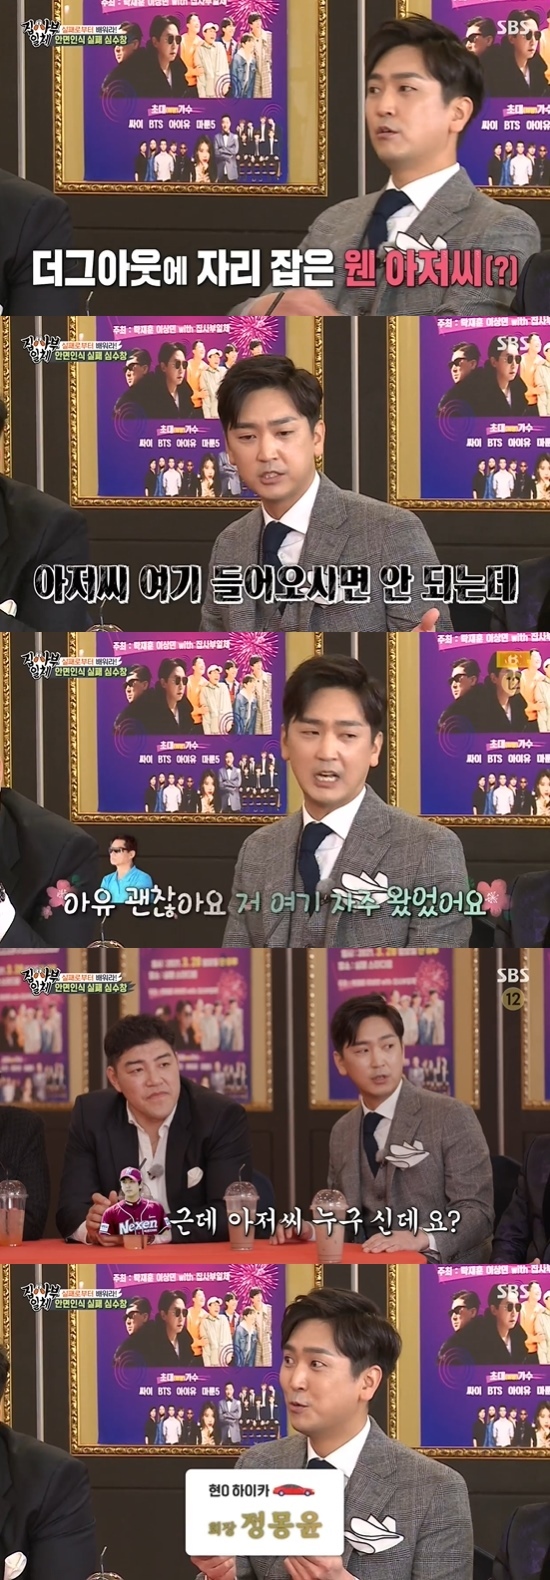 All The Butlers Shim Soo-chang confessed that he did not recognize Chung Mong-yoon Chairperson during his career.In SBS All The Butlers broadcast on the 28th, Shim Soo-chang, Kim Minsoo, Solbi, Jang Dong-min and Ji Suk-jin announced their failure.On that day, Failure Stival began. Shim Soo-chang said about his failure, I can tell you an abstract failure story, and all the records are accumulated.I said I would donate during the losing streak. I said I would collect one win, but my nickname became 0 Won donation angel.Shim Soo-chang laughed, saying, I did not know it and thought it was a real donation angel.Shim Soo-chang said facial recognition also failed.Shim Soo-chang said, I do not remember peoples faces well. I went to Nexen, but the time of uniform laundry was not well erased.So I asked The Man from Nowhere and he said he would.But after that, the manager told me who told the boss about the laundry. Shim Soo-chang then said, It was the opening game of Jamsil Stadium, not many high people come. Some The Man from Nowhere came in next to the dugout.I said you shouldnt come in here in curiosity. And then The Man from Nowhere said, Its okay, Ive come in often.I gave him a business card without saying who it was. It was Hyundai Haikar Chairperson Chung Mong-yoon Kim Dong-hyun said, Look at the TV, read the news.Yang Se-hyeong said, When I saw it, I did not take off my clothes but I took off my clothes. Ji Suk-jin said, I took off my clothes even if I won 18 consecutive games.The next day, Shim Soo-chang said, He said hello to 90 degrees. Shim Soo-chang said, So lets say hello on a regular basis.Its Chung Mong-yoon Fairperson. Meanwhile, Ji Suk-jin revealed past cases of fraud, including film music CDs and crocodile leather wallets.Ji Suk-jin said, I bought a movie music CD, and all 60 were called by a fake singer. Lee Seung-gi said, When I heard it when I was a child, I was shocked by the entertainer.Ji Suk-jin then said: I want to abandon the stigma of the palanguine, there are people who bring in nonsense, one day an acquaintance came to see a wonderful investment.They say that there are six legs that I developed this time. Do I believe that? What spider? And laughed.Then I pulled a bottle of water from my briefcase, and I said that it was a biowater, and a second-class beef became a horny sirloin, Ji Suk-jin said.Then Jang Dong-min said, Is it a pig? And laughed, saying that he heard it. I do not know how to make that water.I put it in a stone. Tak Jae-hoon, who saw it, said, There is something that works among the people who failed. Im going to wrestle my arms and if I apply water, I win, which is about 190cm, Ji Suk-jin said.When Yang Se-hyeong asked, Did not you wrestle your arms? Ji Suk-jin laughed, saying, I did.Photo = SBS Broadcasting Screen